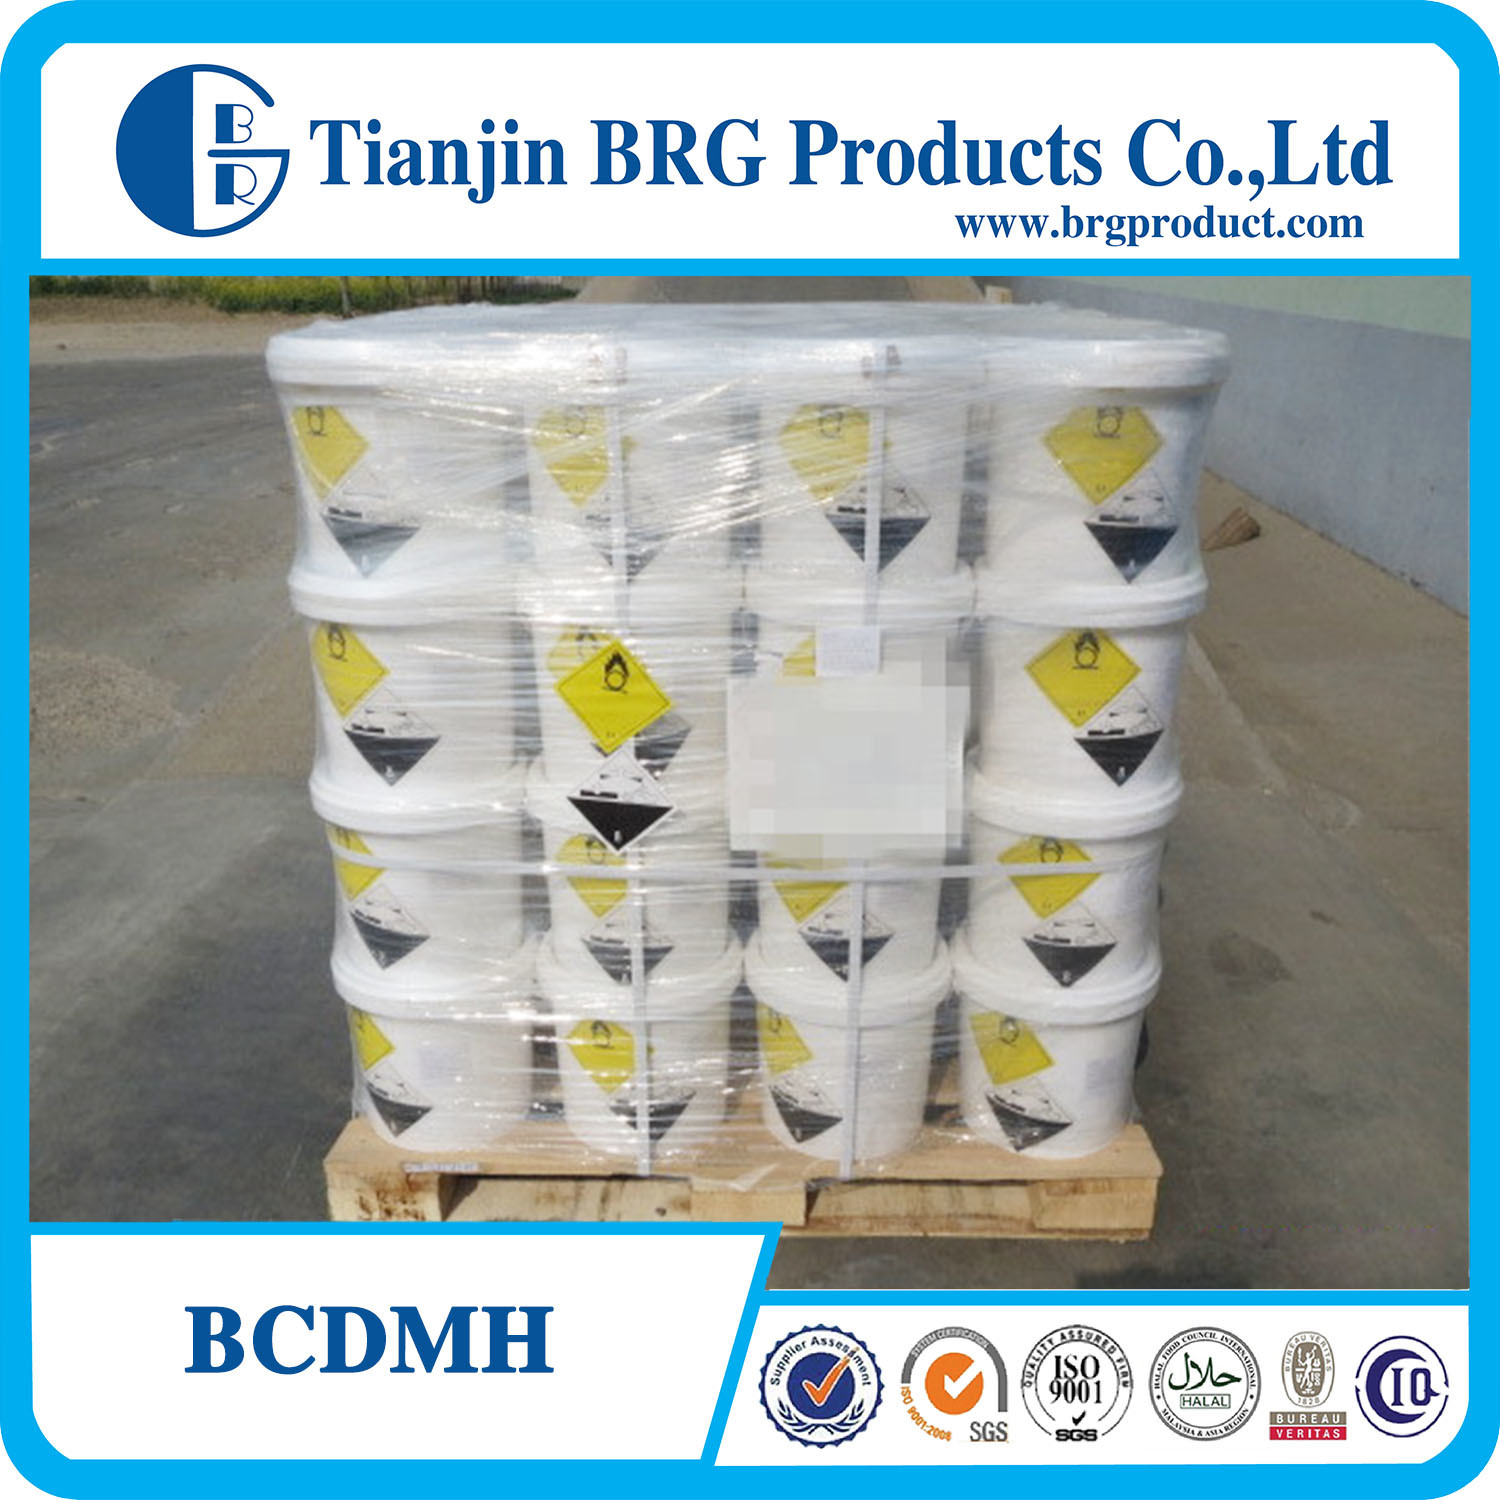 Hot Sale Bcdmh (bromine tablet) for Disinfecting in Hospital